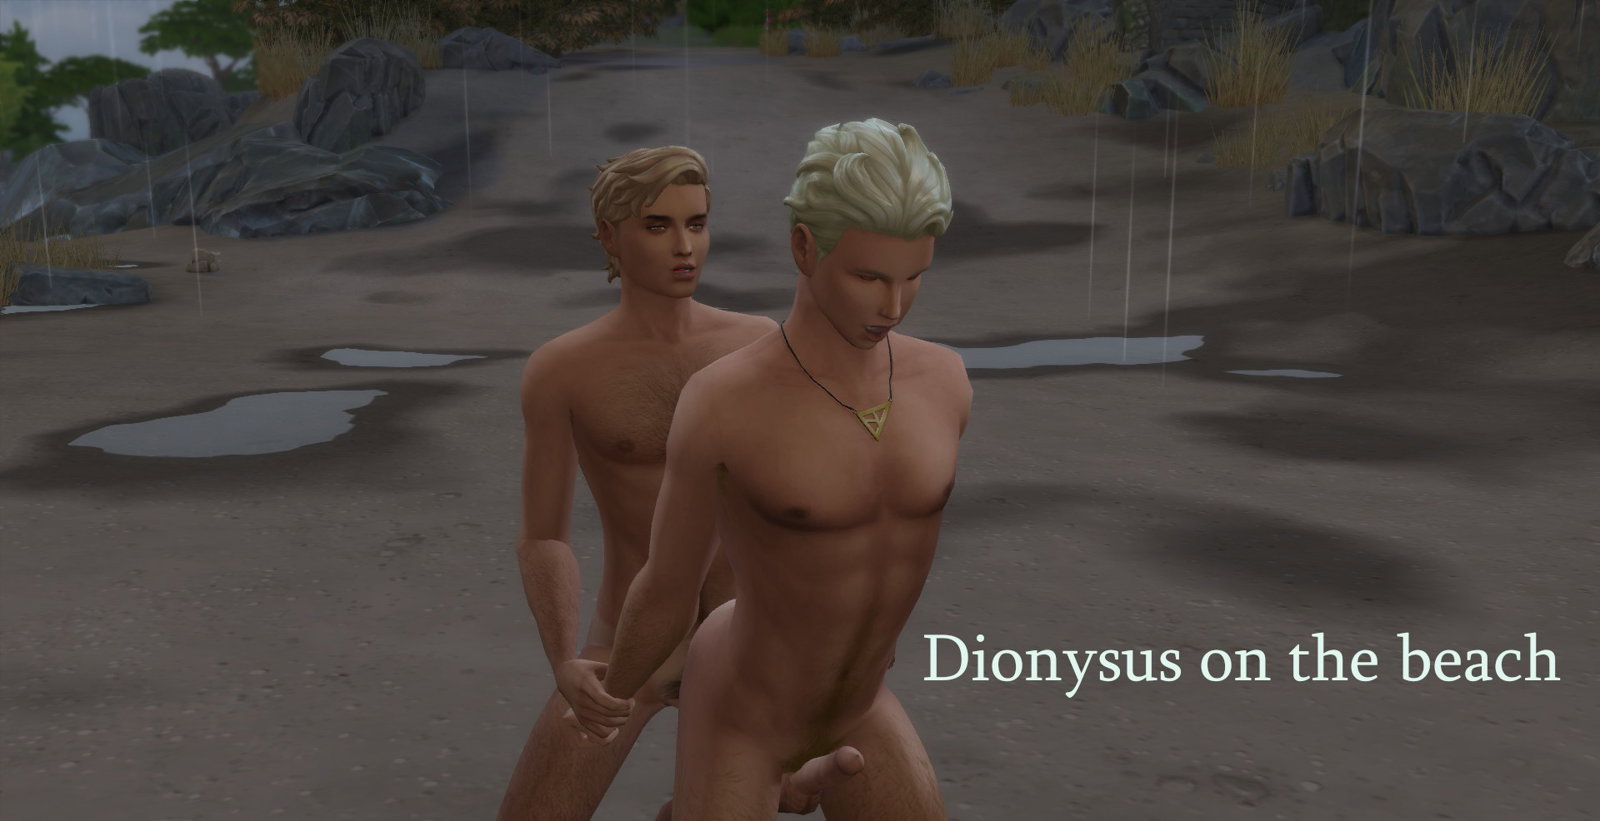 Photo by Sims4Men with the username @Sims4Men, who is a verified user,  April 28, 2019 at 10:45 AM. The post is about the topic Gay and the text says 'The Slaves bid the Gods of summer ado'